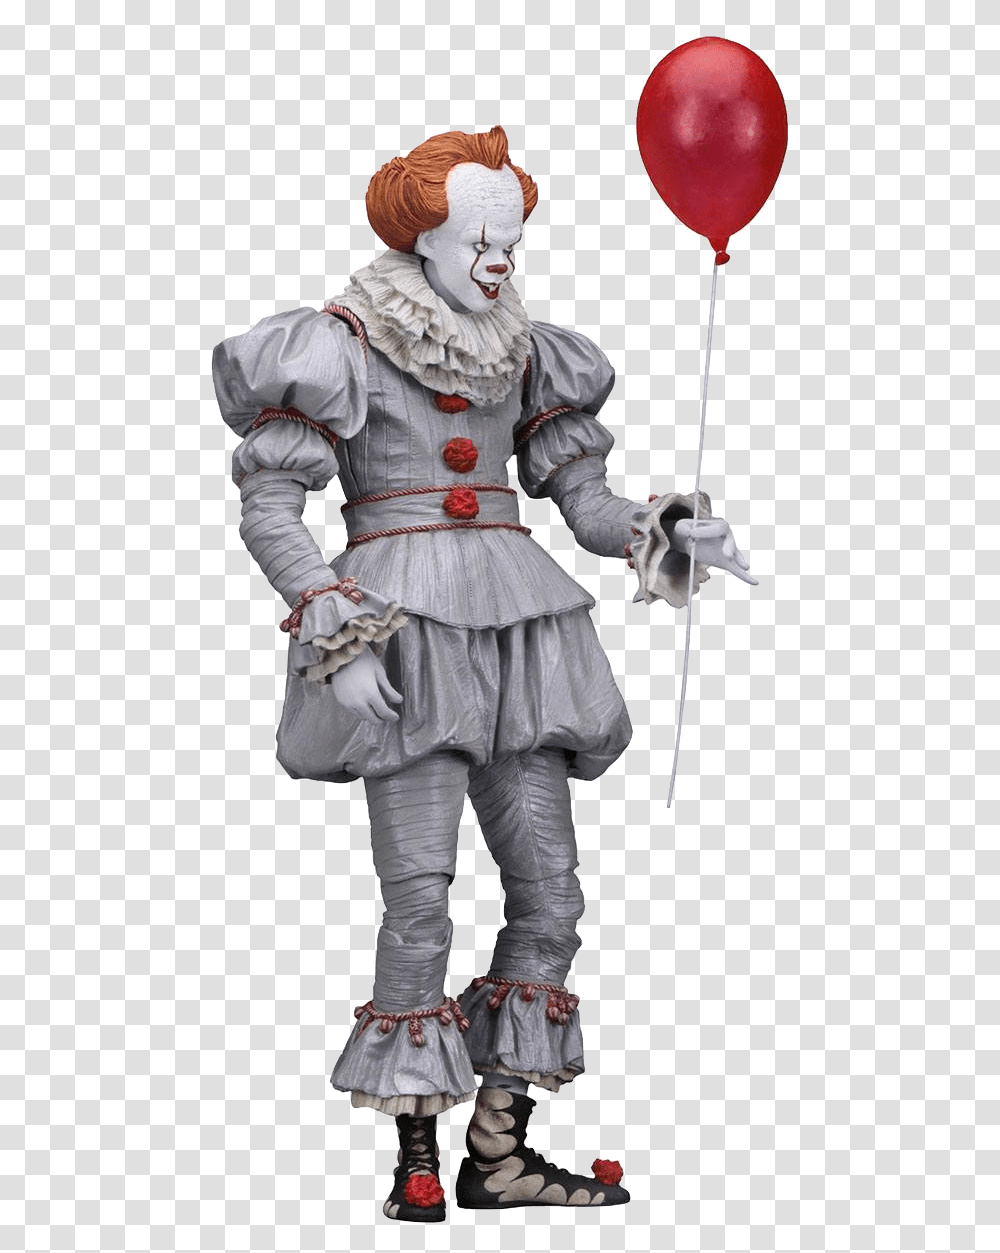 Neca 2017 It Pennywise Figure Toyslife Action Figure Pennywise, Person, Human, Astronaut, Dish Transparent Png